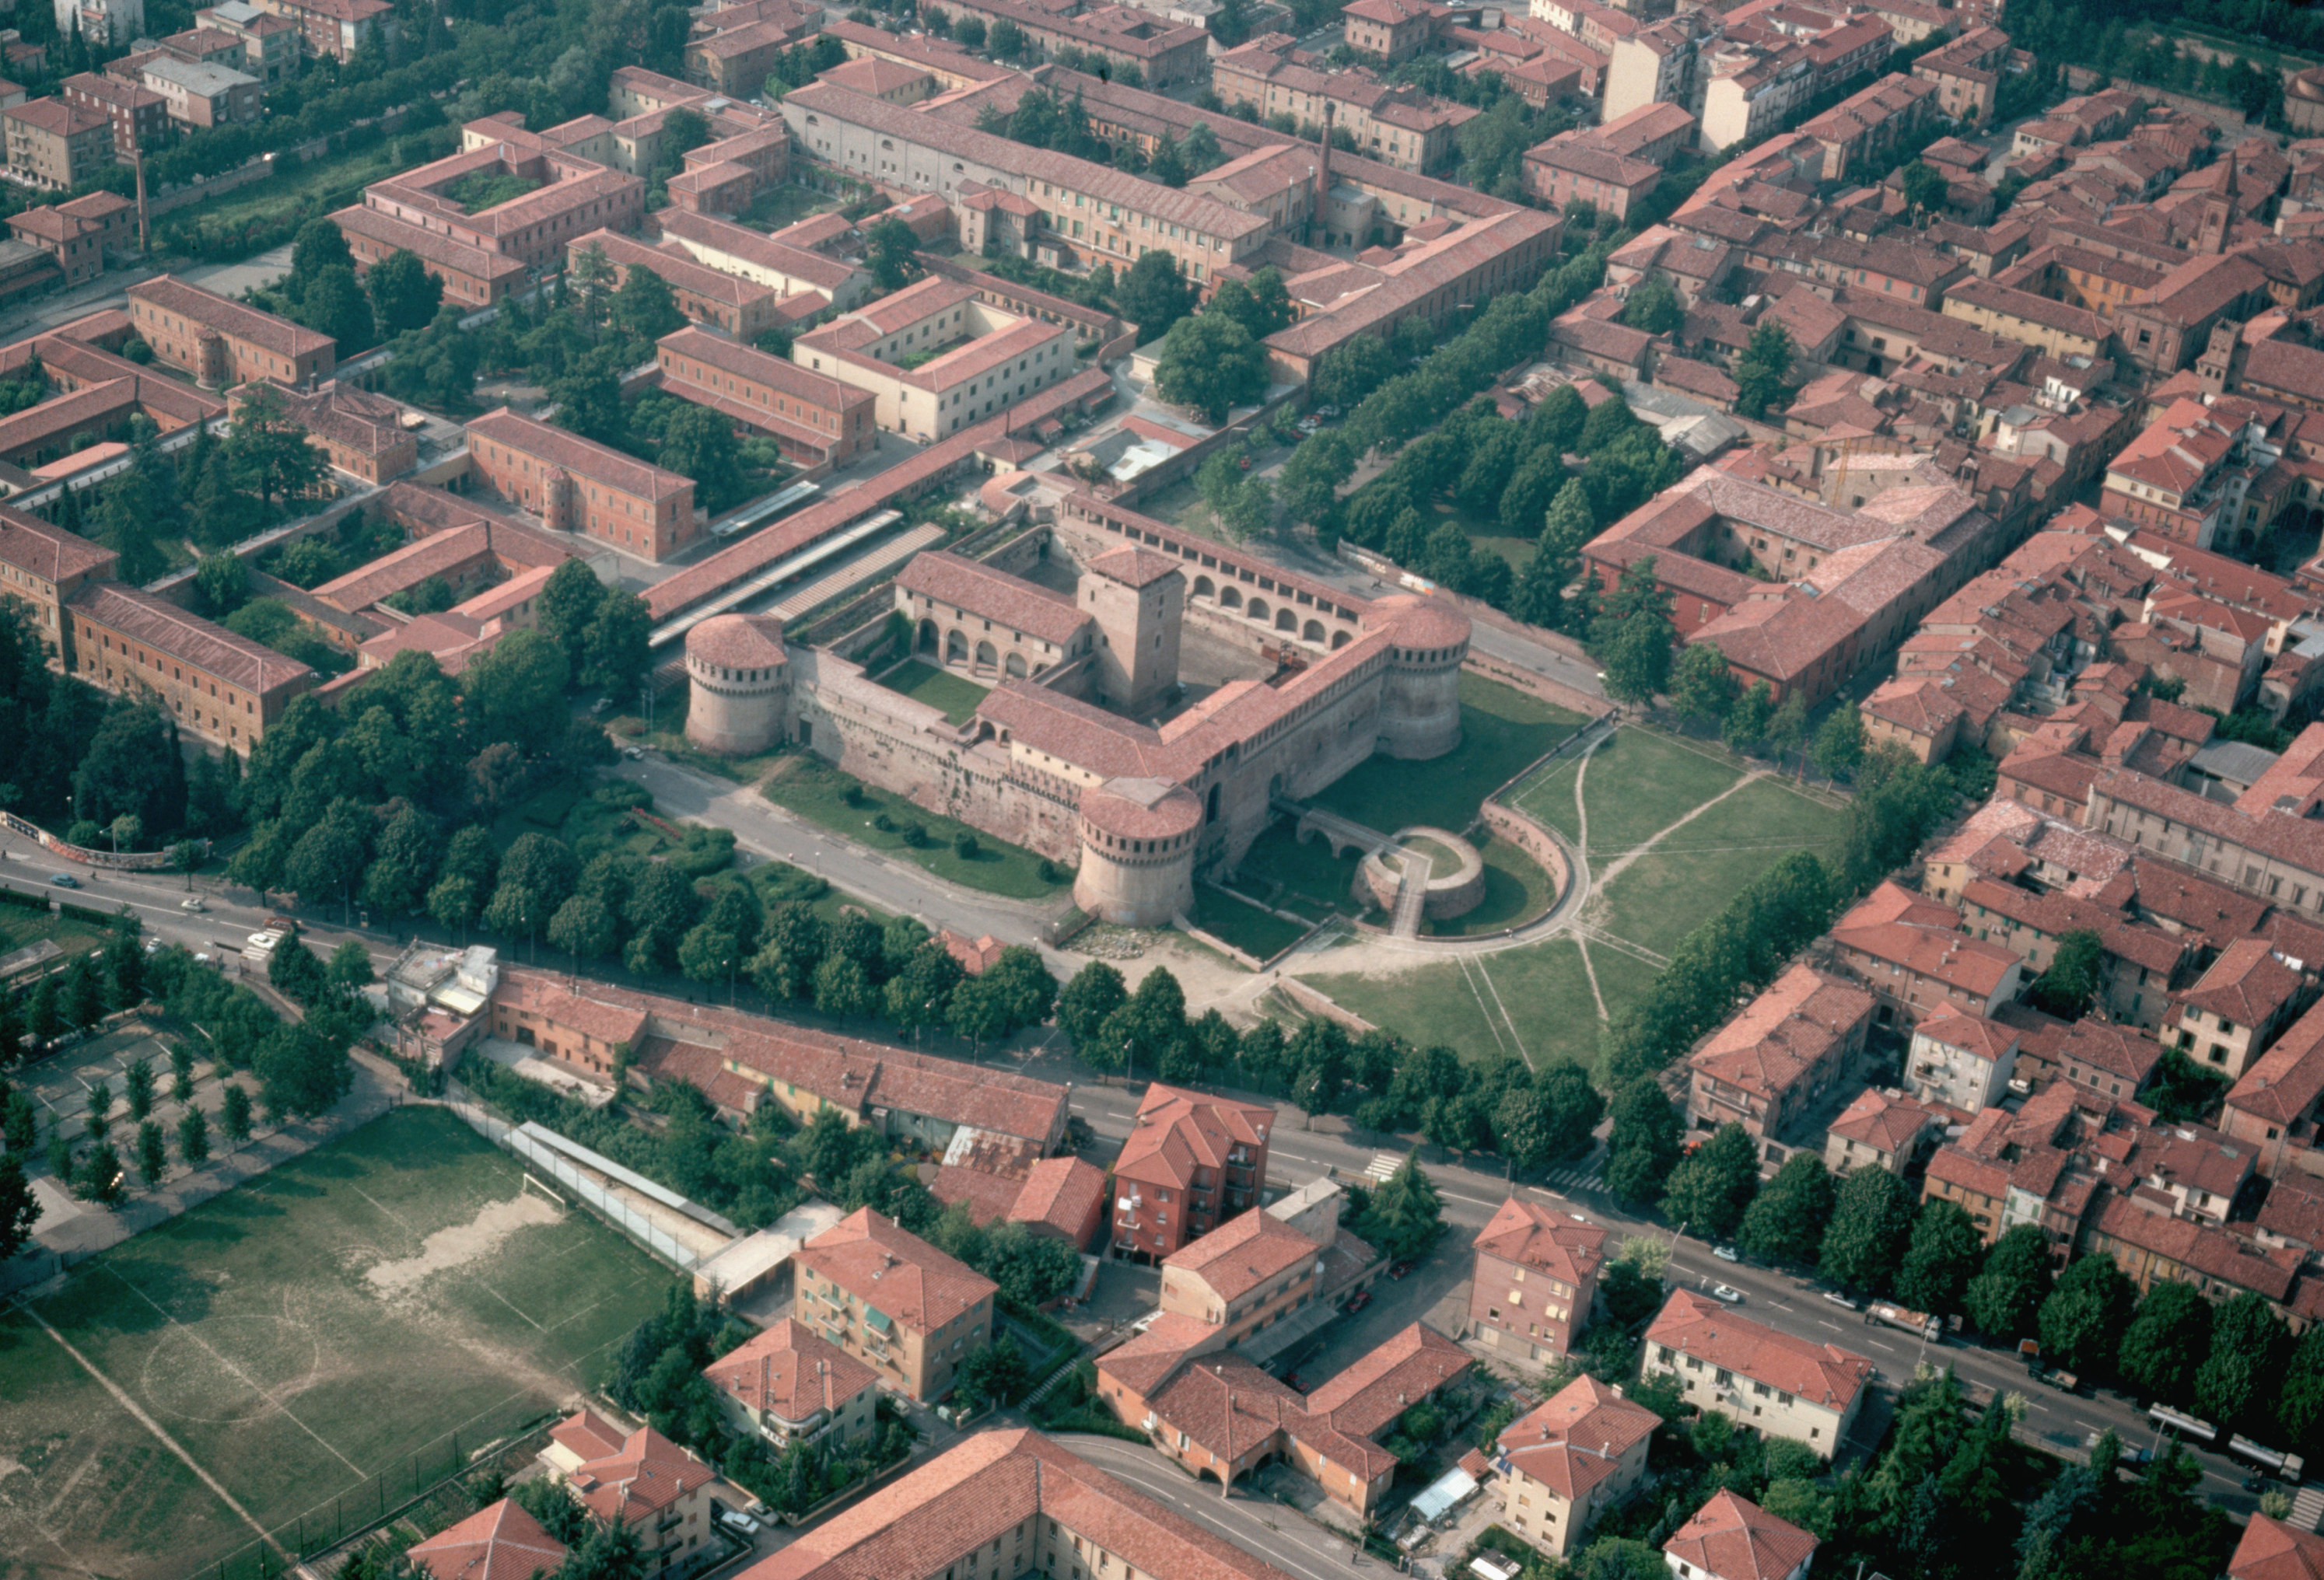 aerial view of Imola, Italy which has lots of buildings in square formations